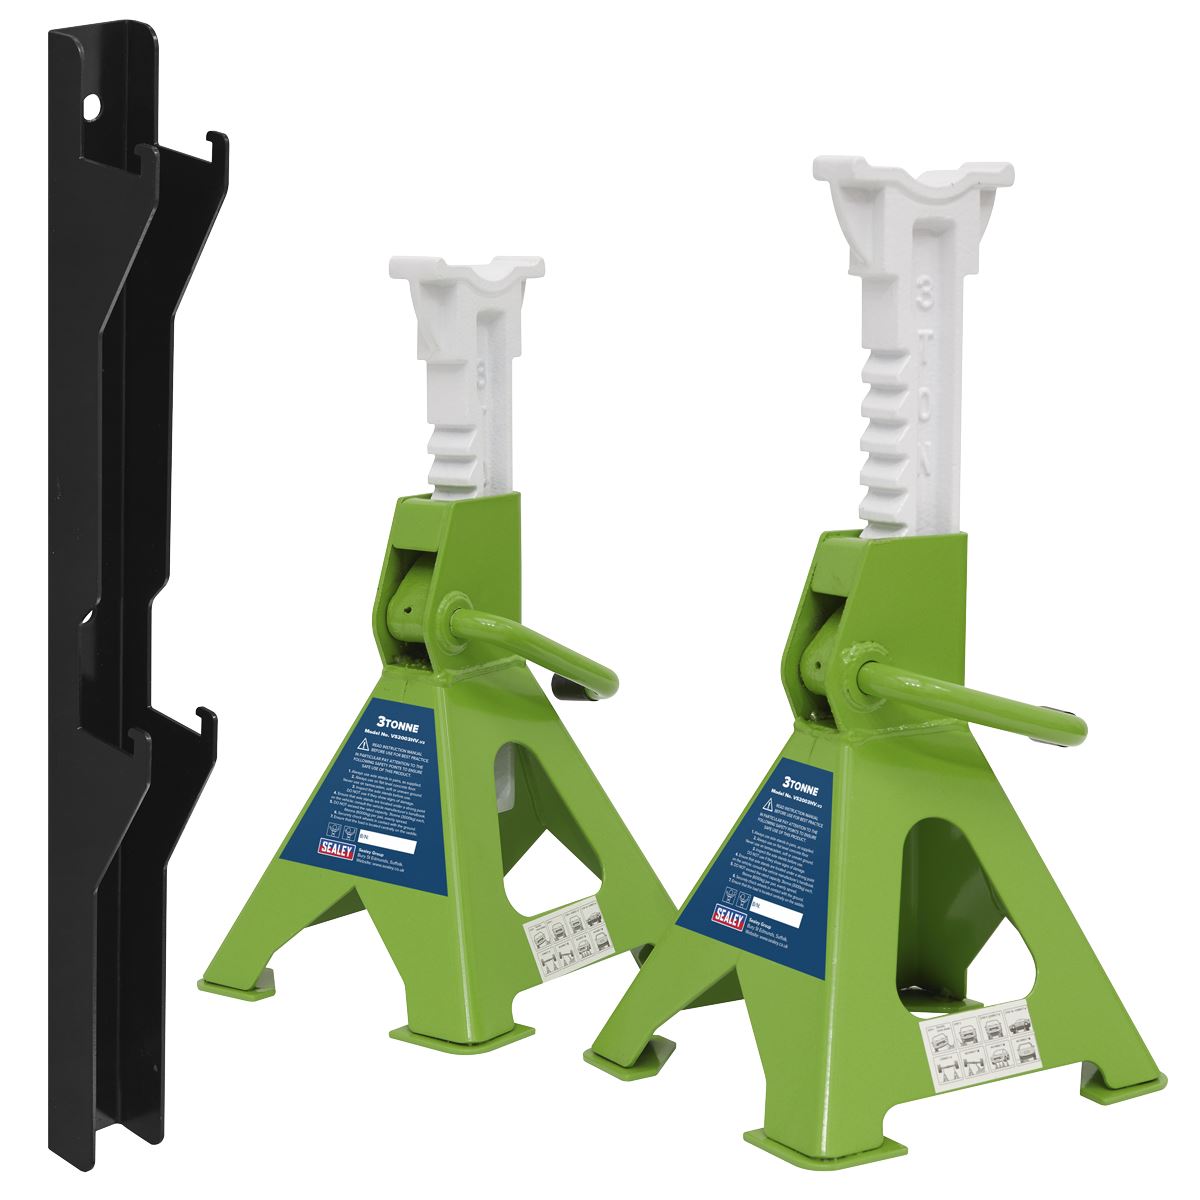 Sealey 3 Tonne Axle Stand & Axle Stand Storage Rack Combo High Vis Green